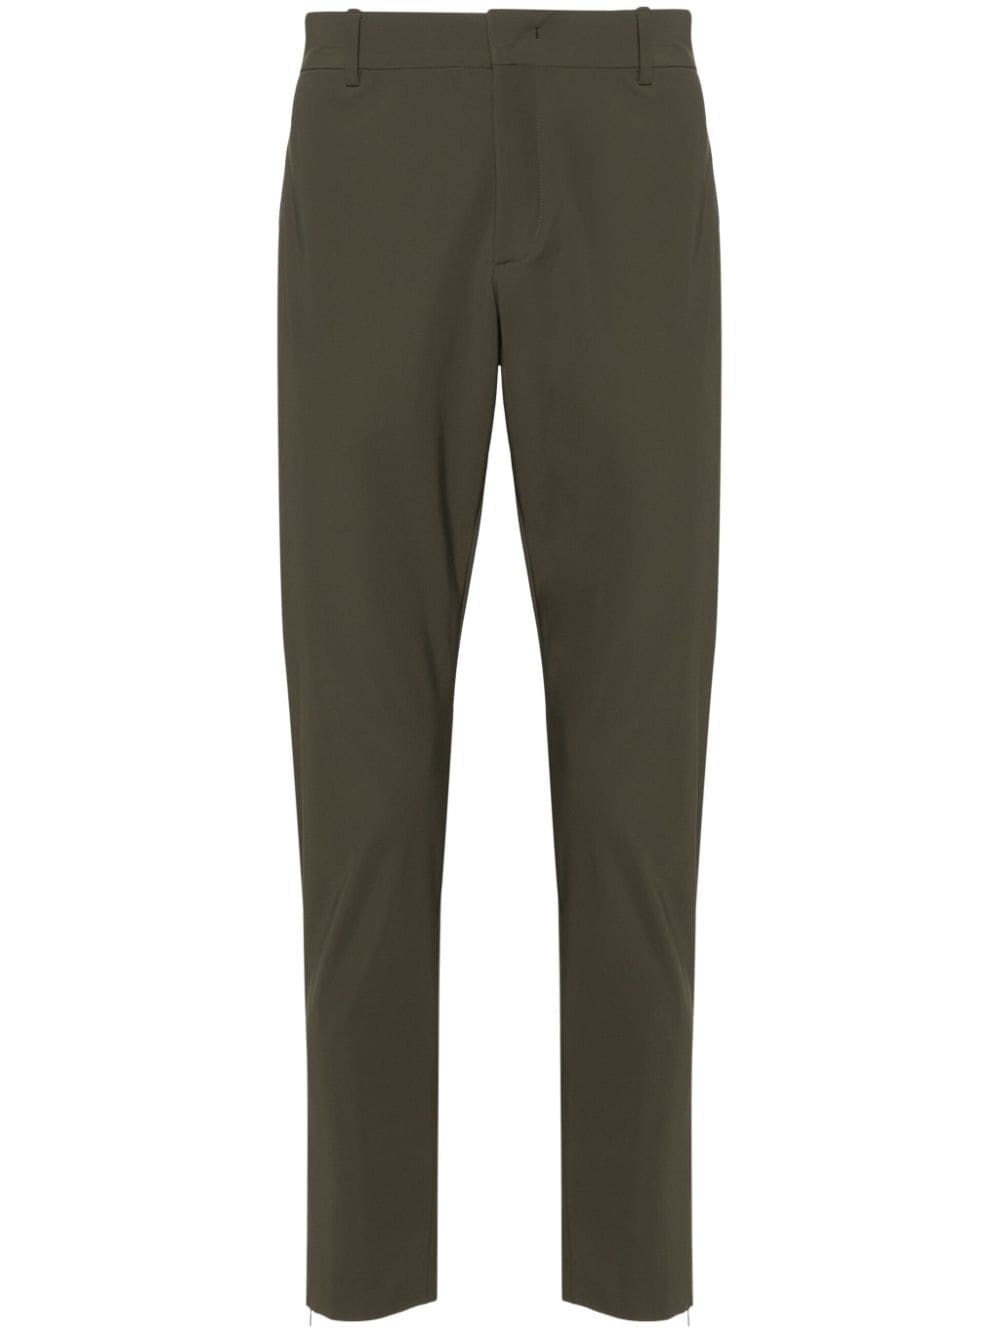 PT Torino cropped technical-jersey trousers - Green von PT Torino